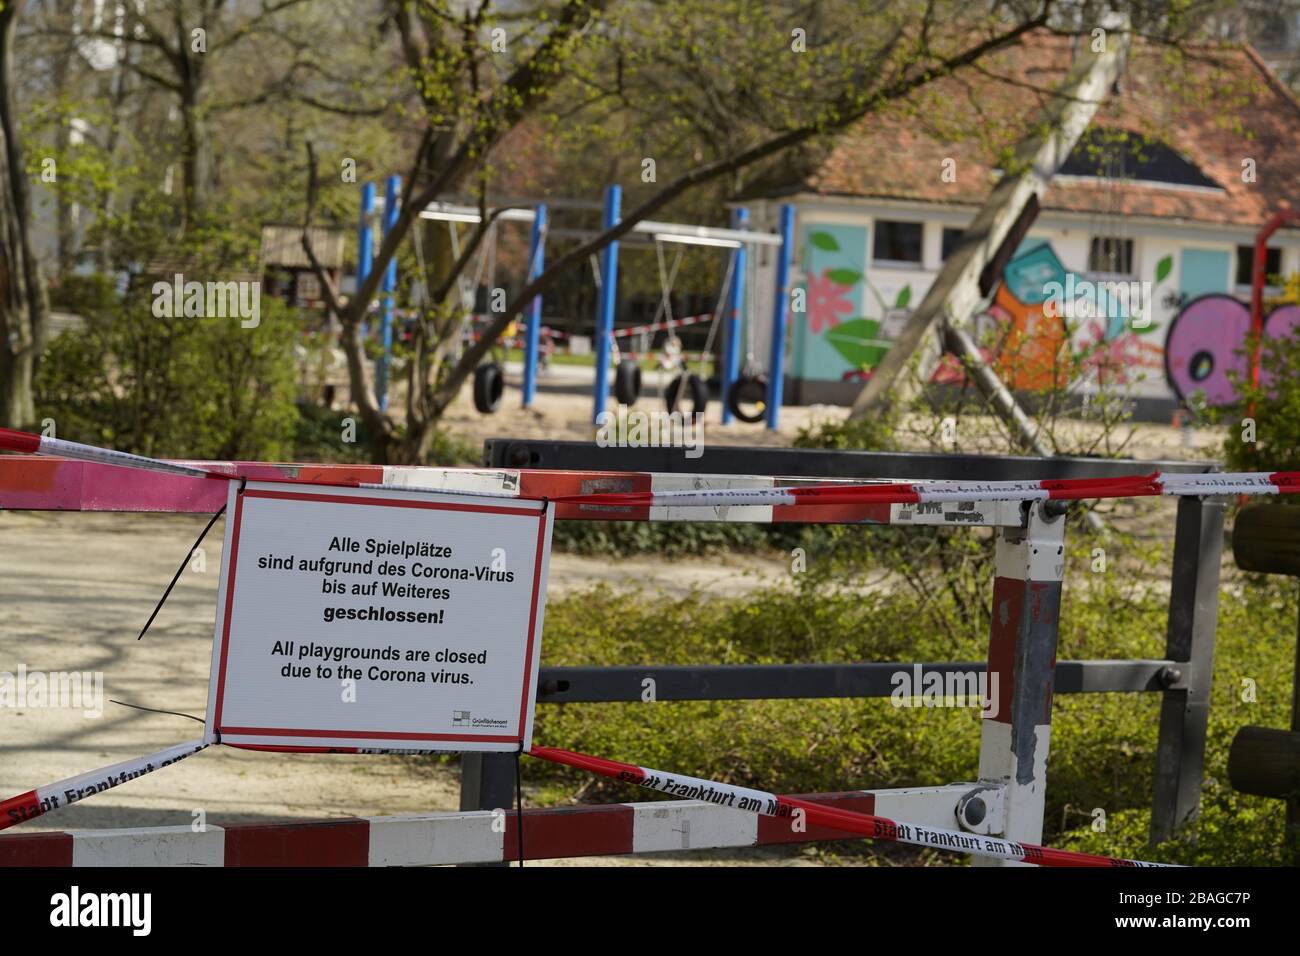 Closed Playgrounds in Frankfurt Germany due to Covid-19 Stock Photo